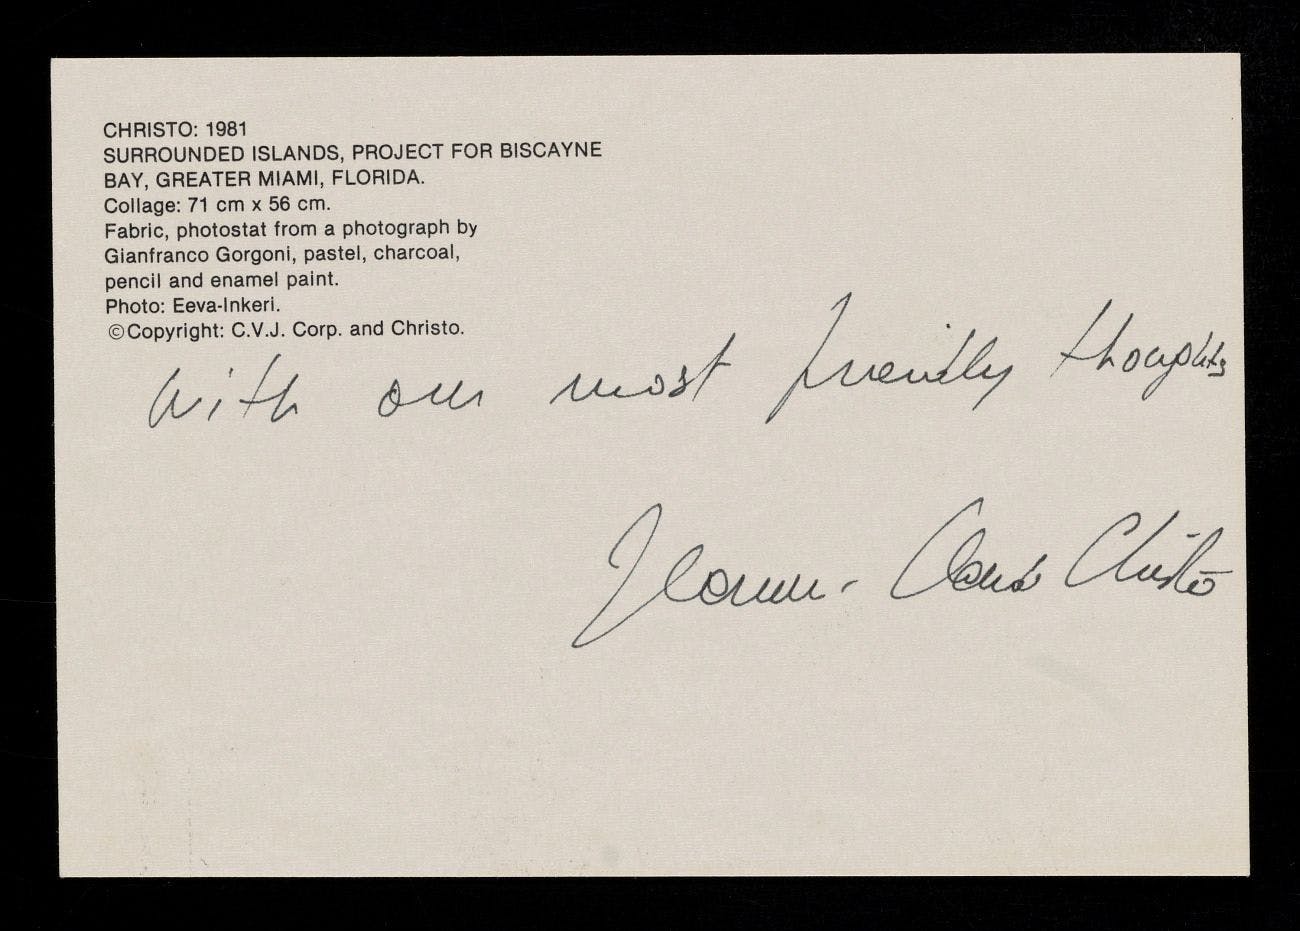 Postcard from Christo and Jeanne-Claude in Emily Hall Tremaine's artist file for Christo